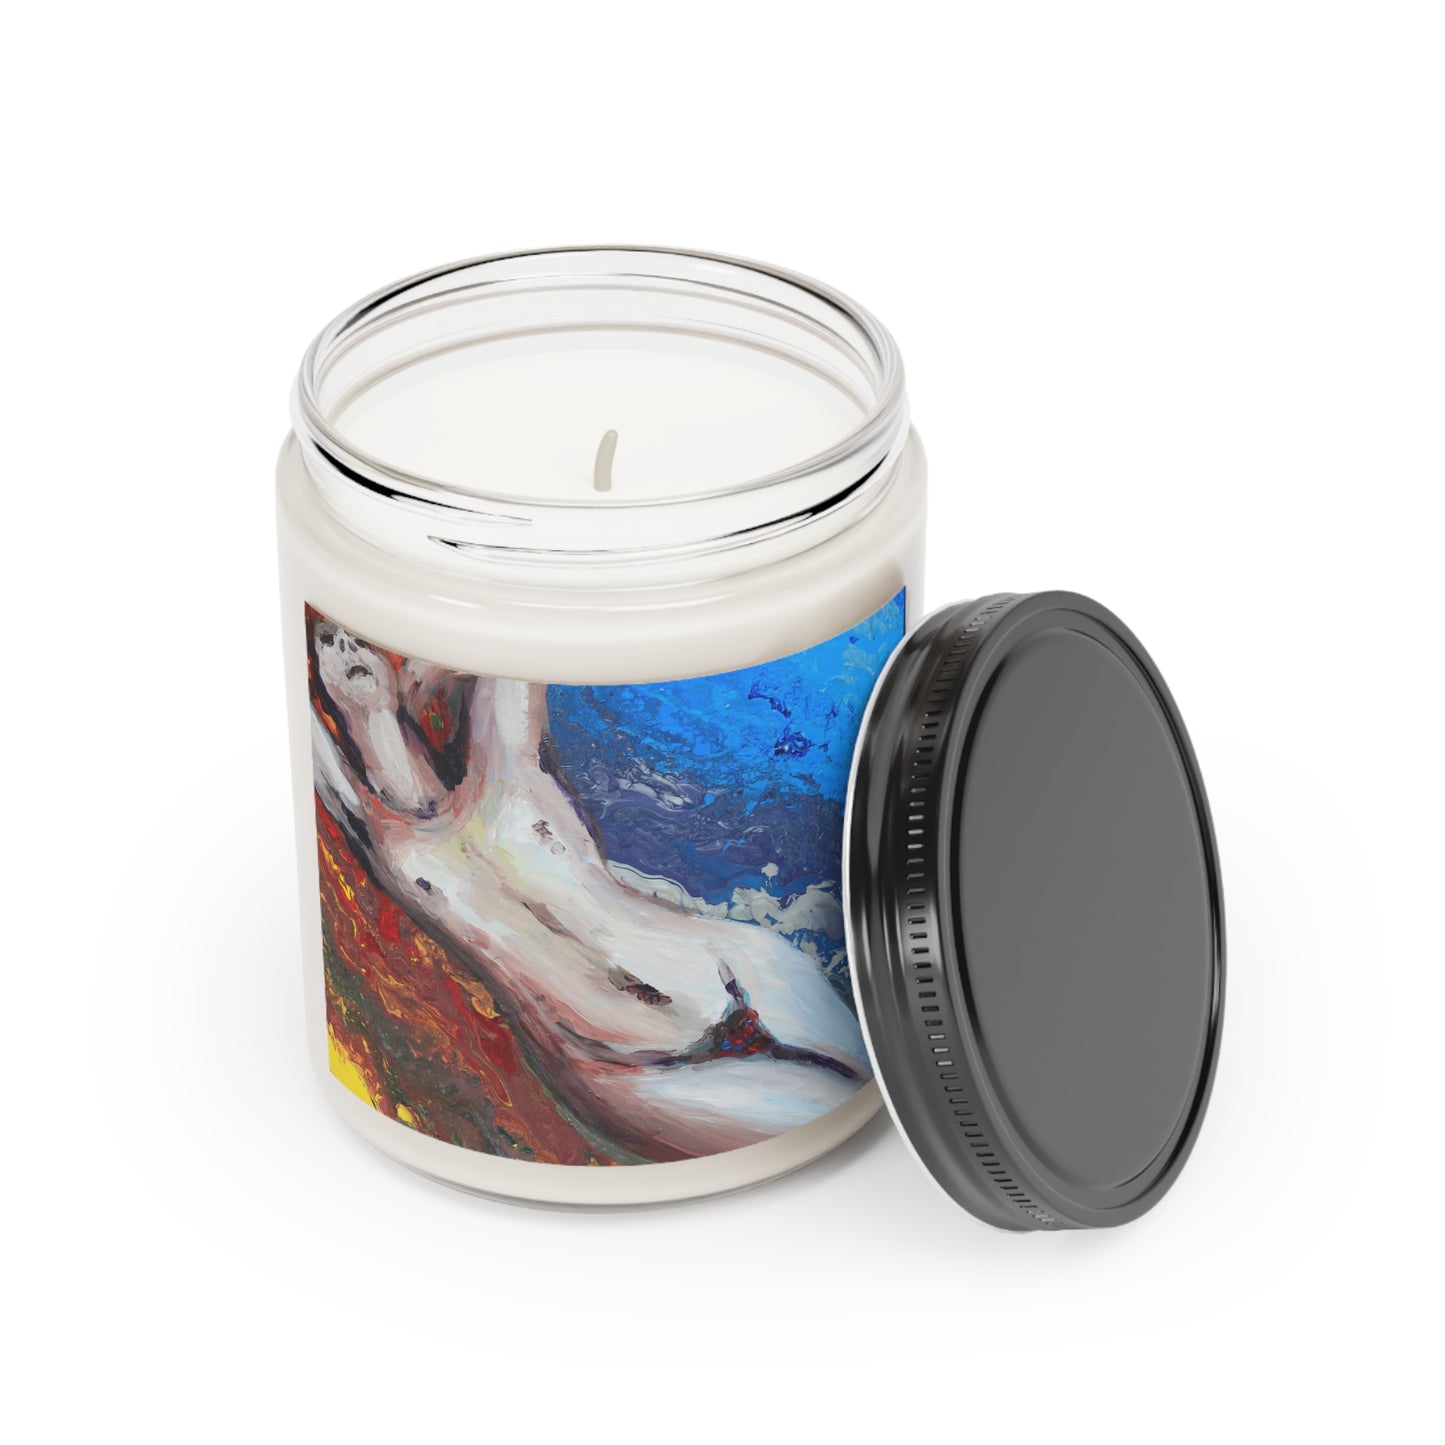 Streaming with the Elements Scented Candle, 9oz